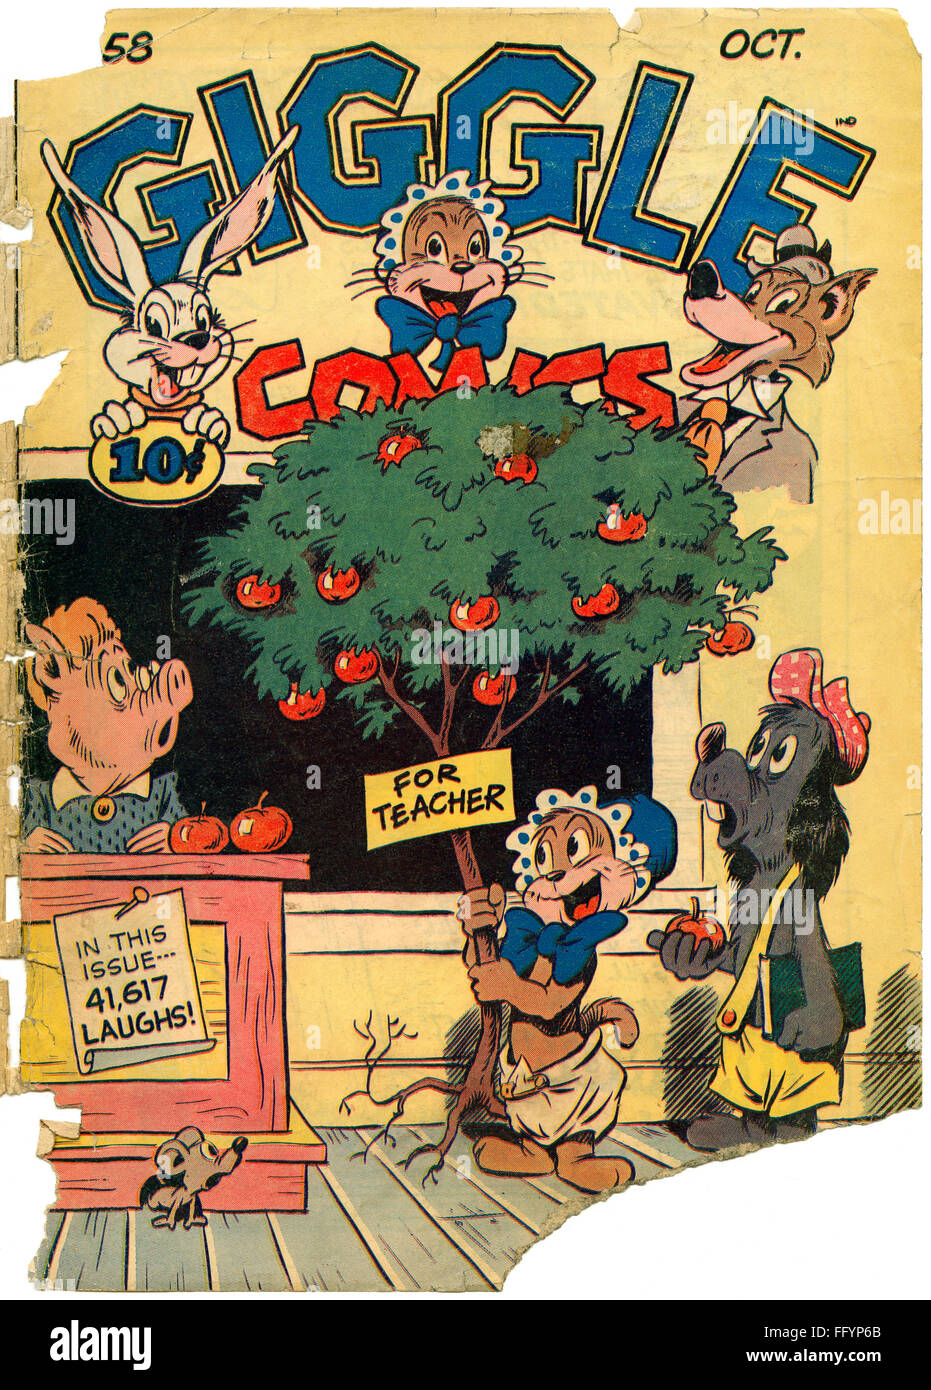 GIGGLE COMICS, 1948. /nThe front cover of the October 1948 issue of Giggle Comics. Stock Photo